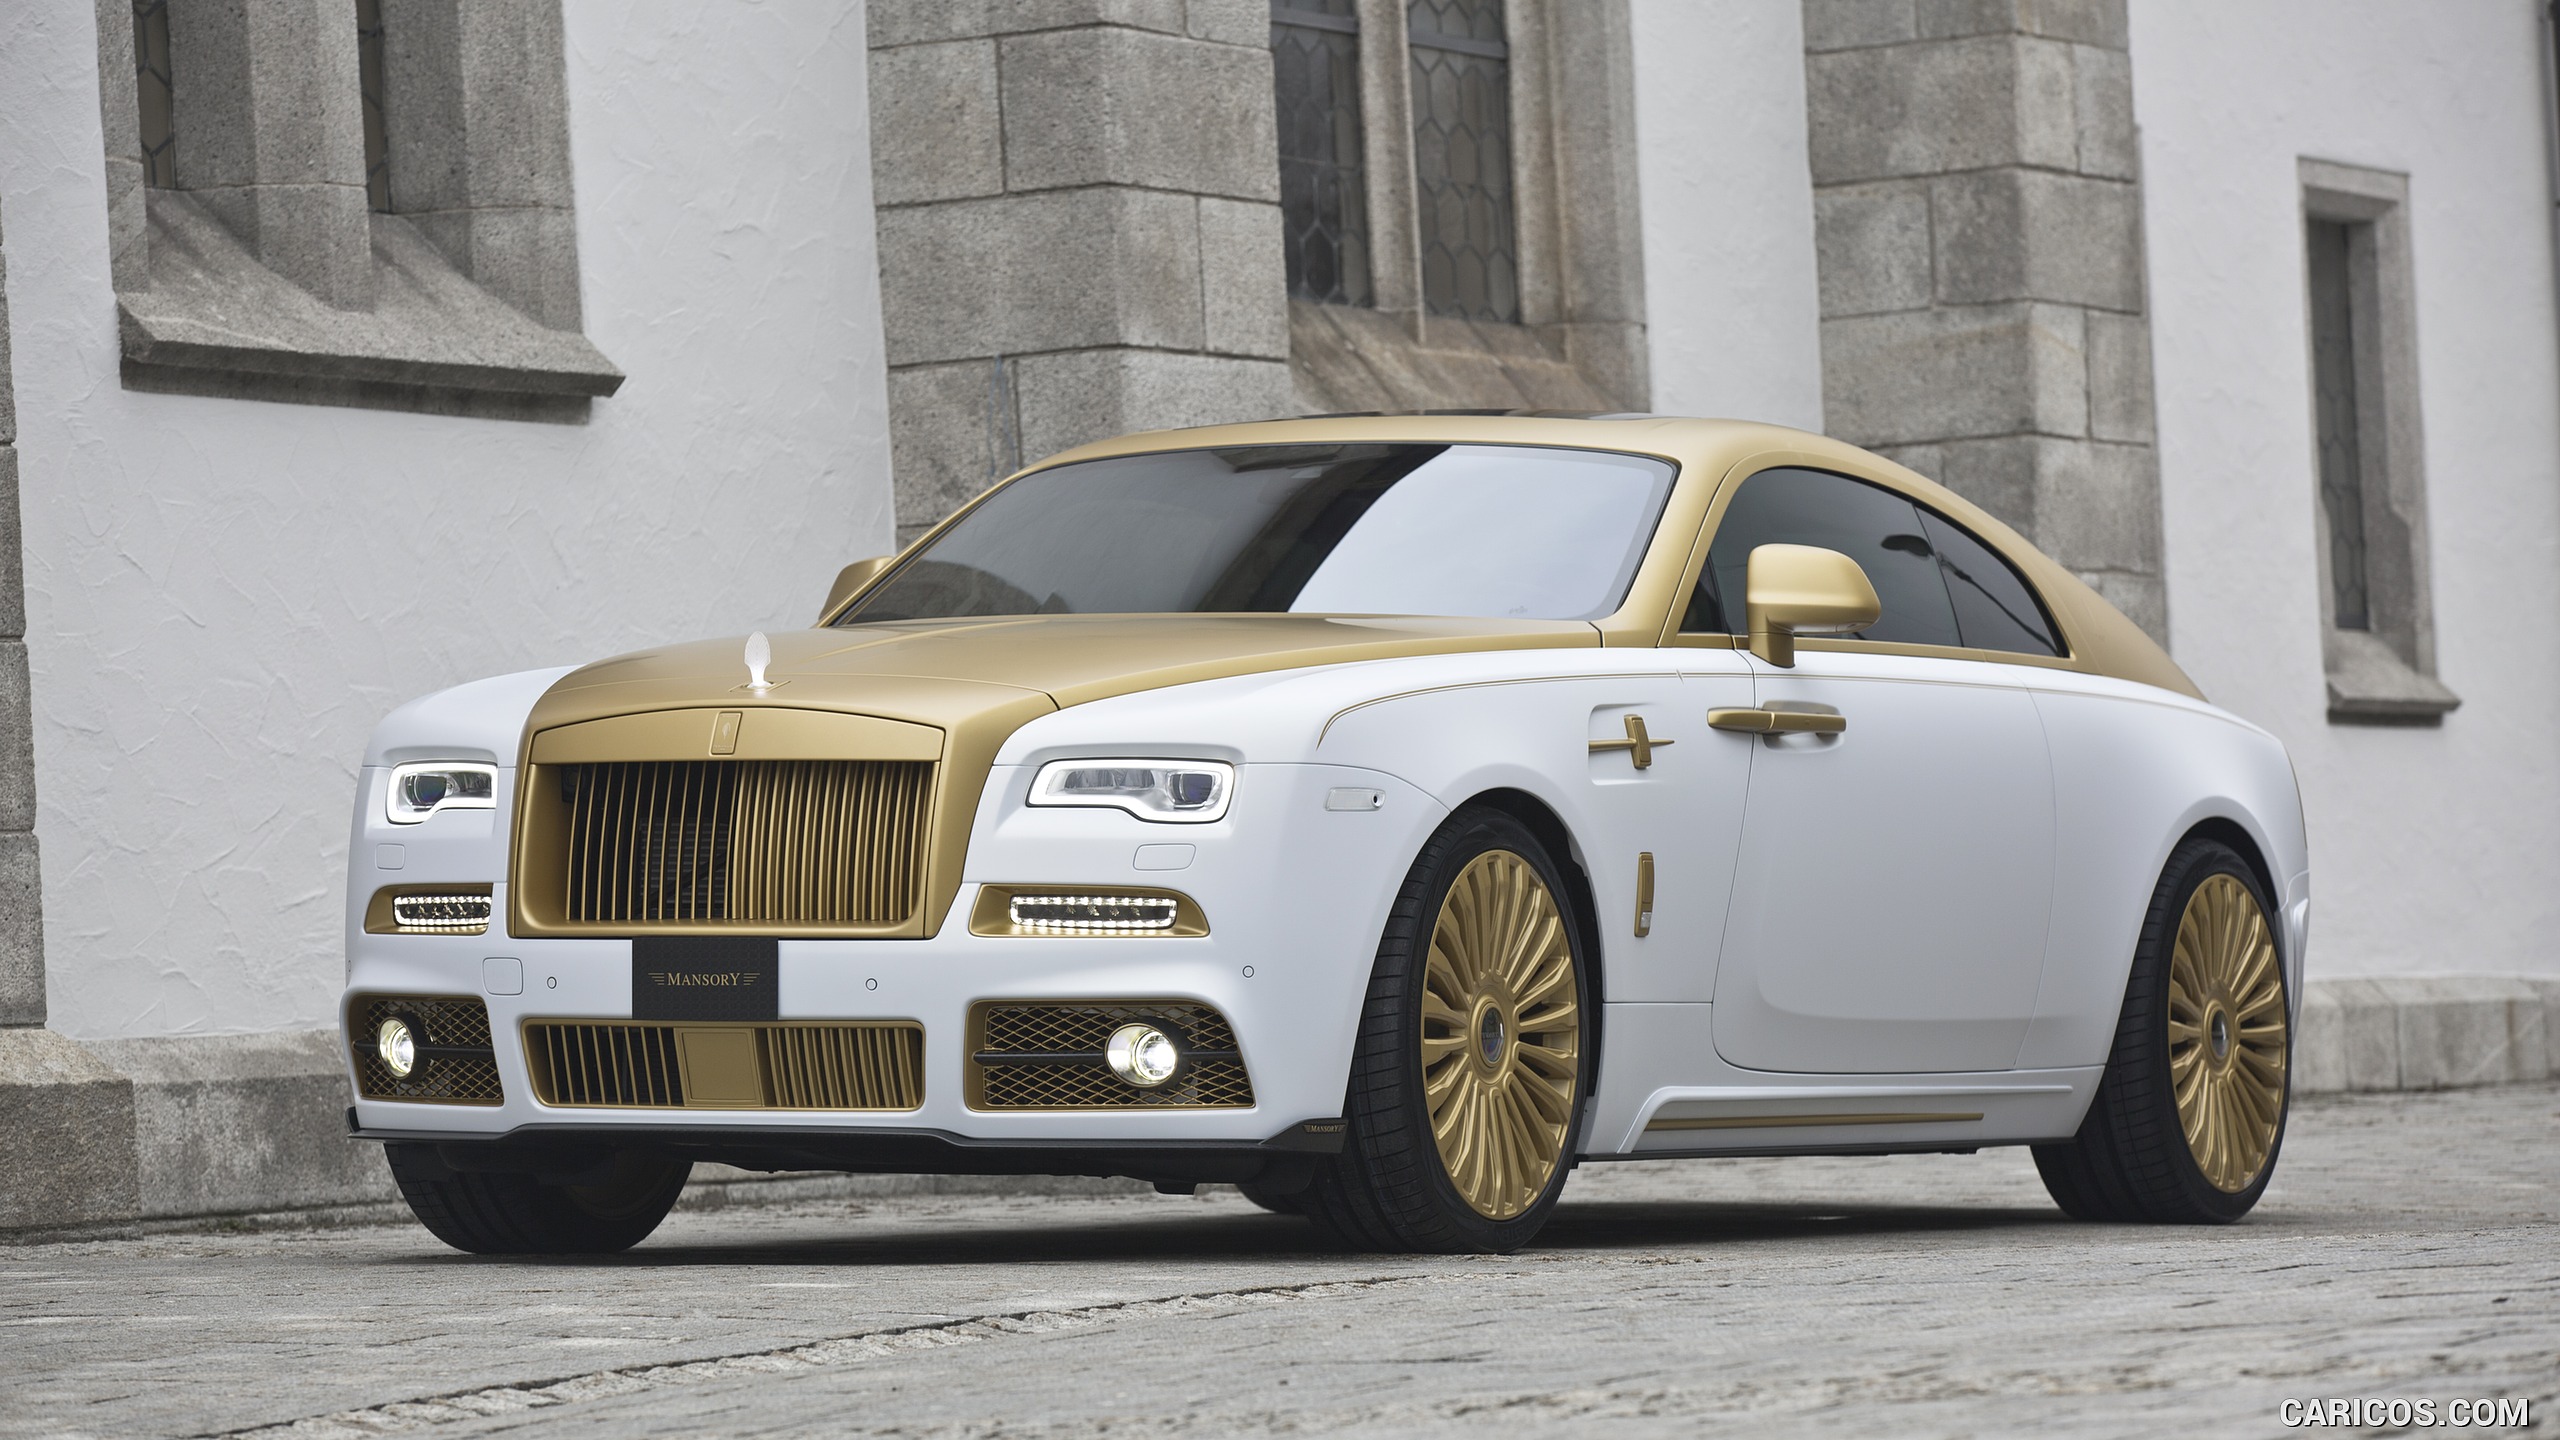 2016 MANSORY Rolls-Royce Wraith Palm Edition 999 - Front, #3 of 10